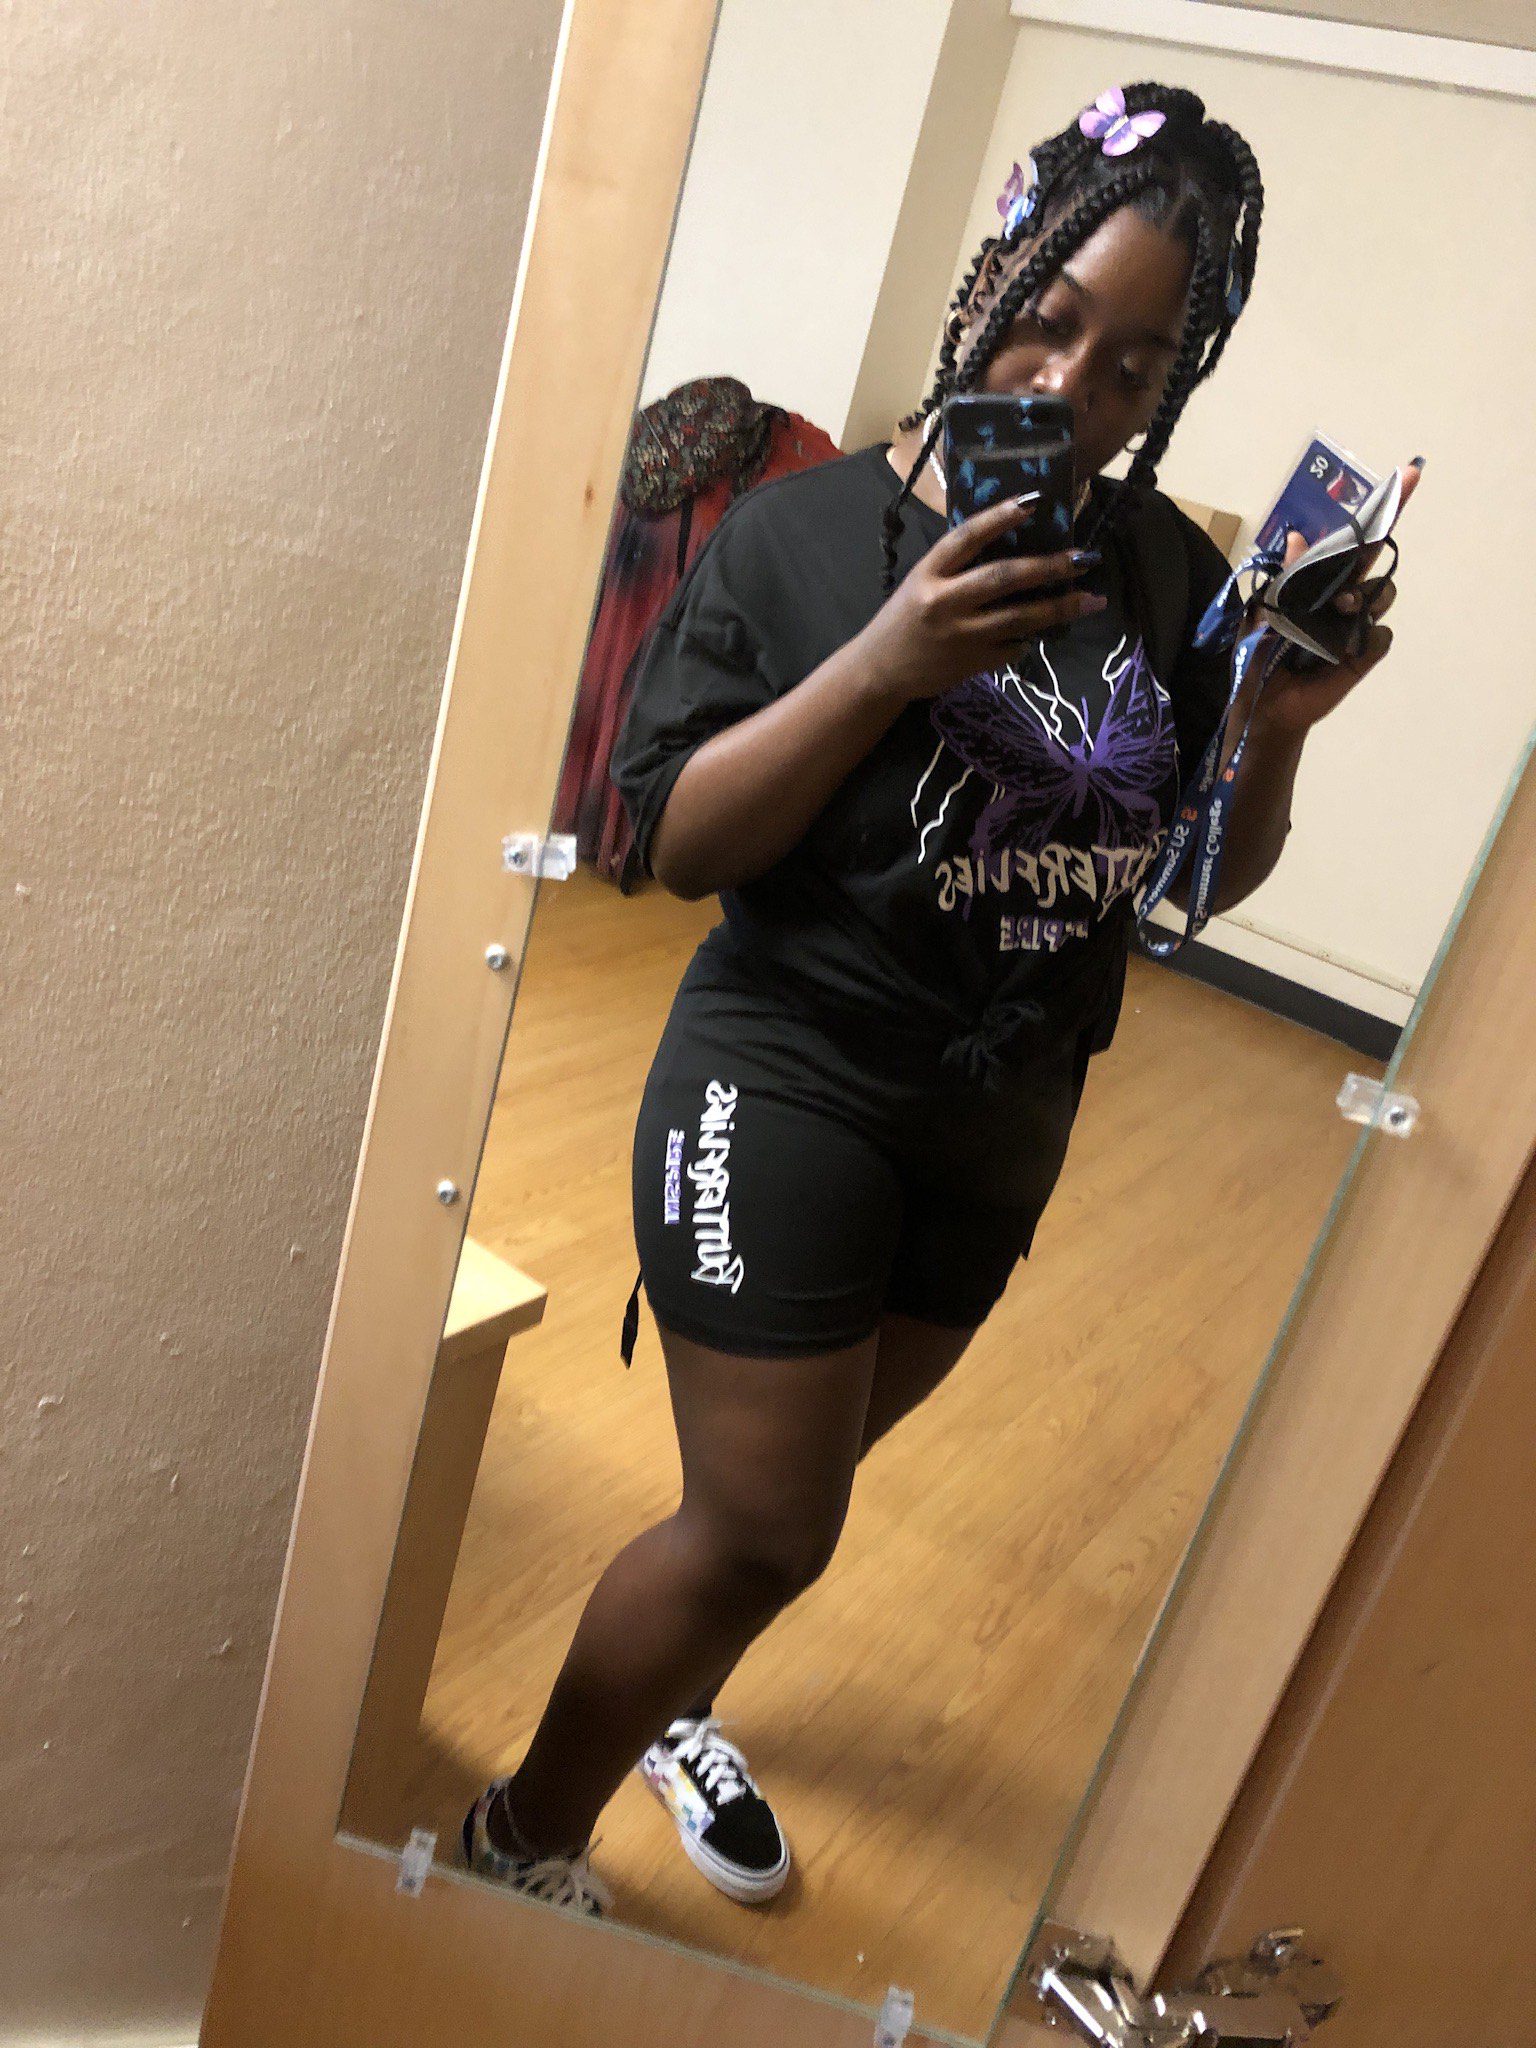 Senior, Starneshia Summers poses in a mirror in her dorm at Emory University.